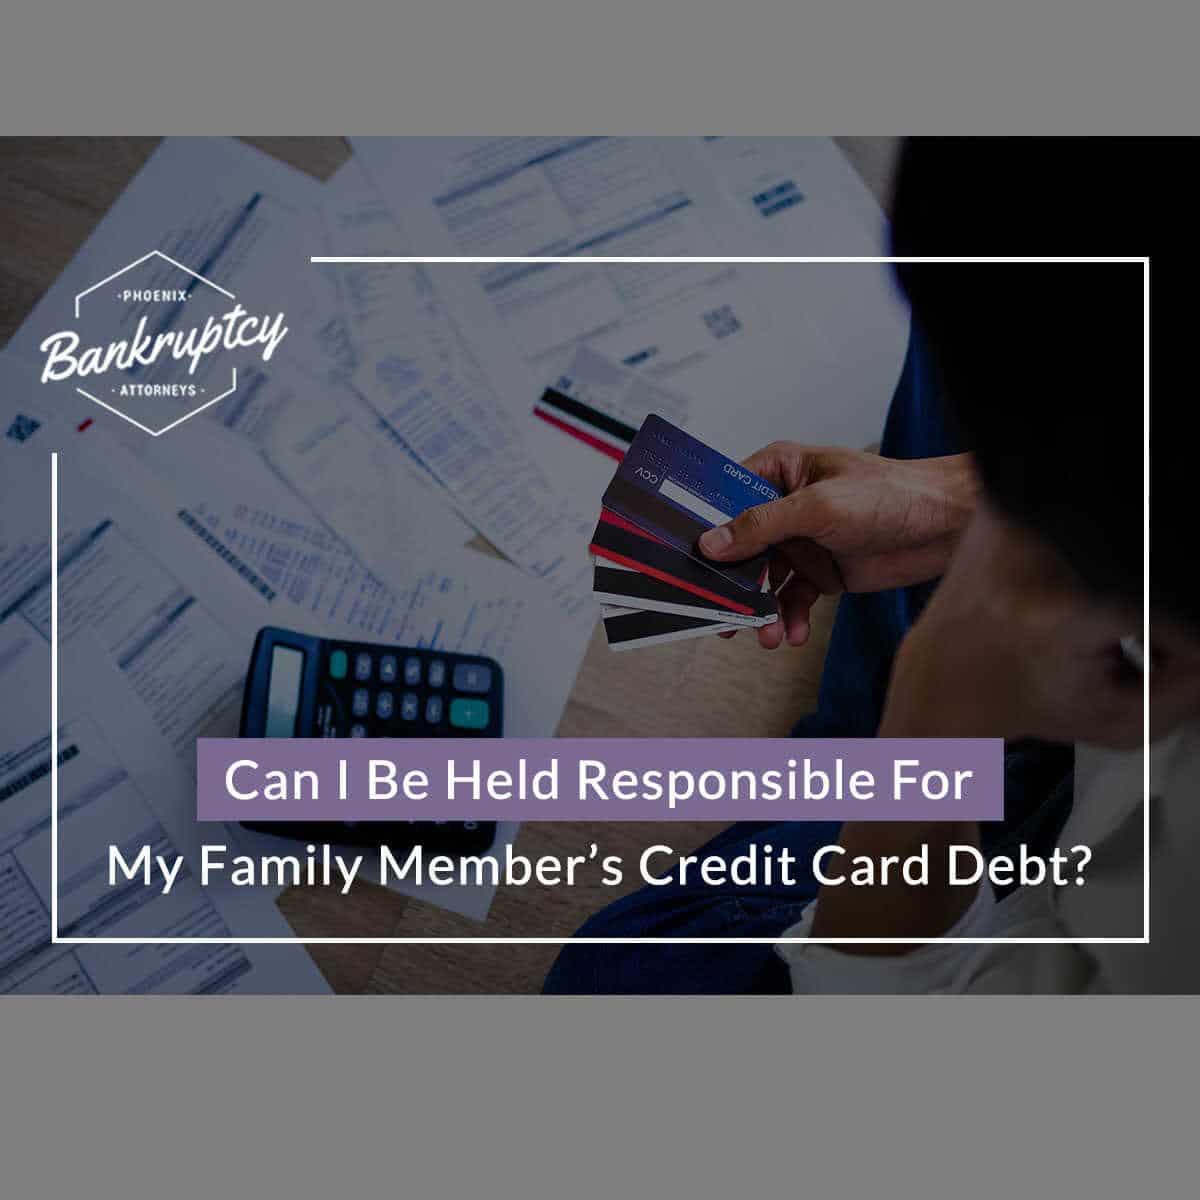 Can I Be Held Responsible For My Family Member’s Credit Card Debt?